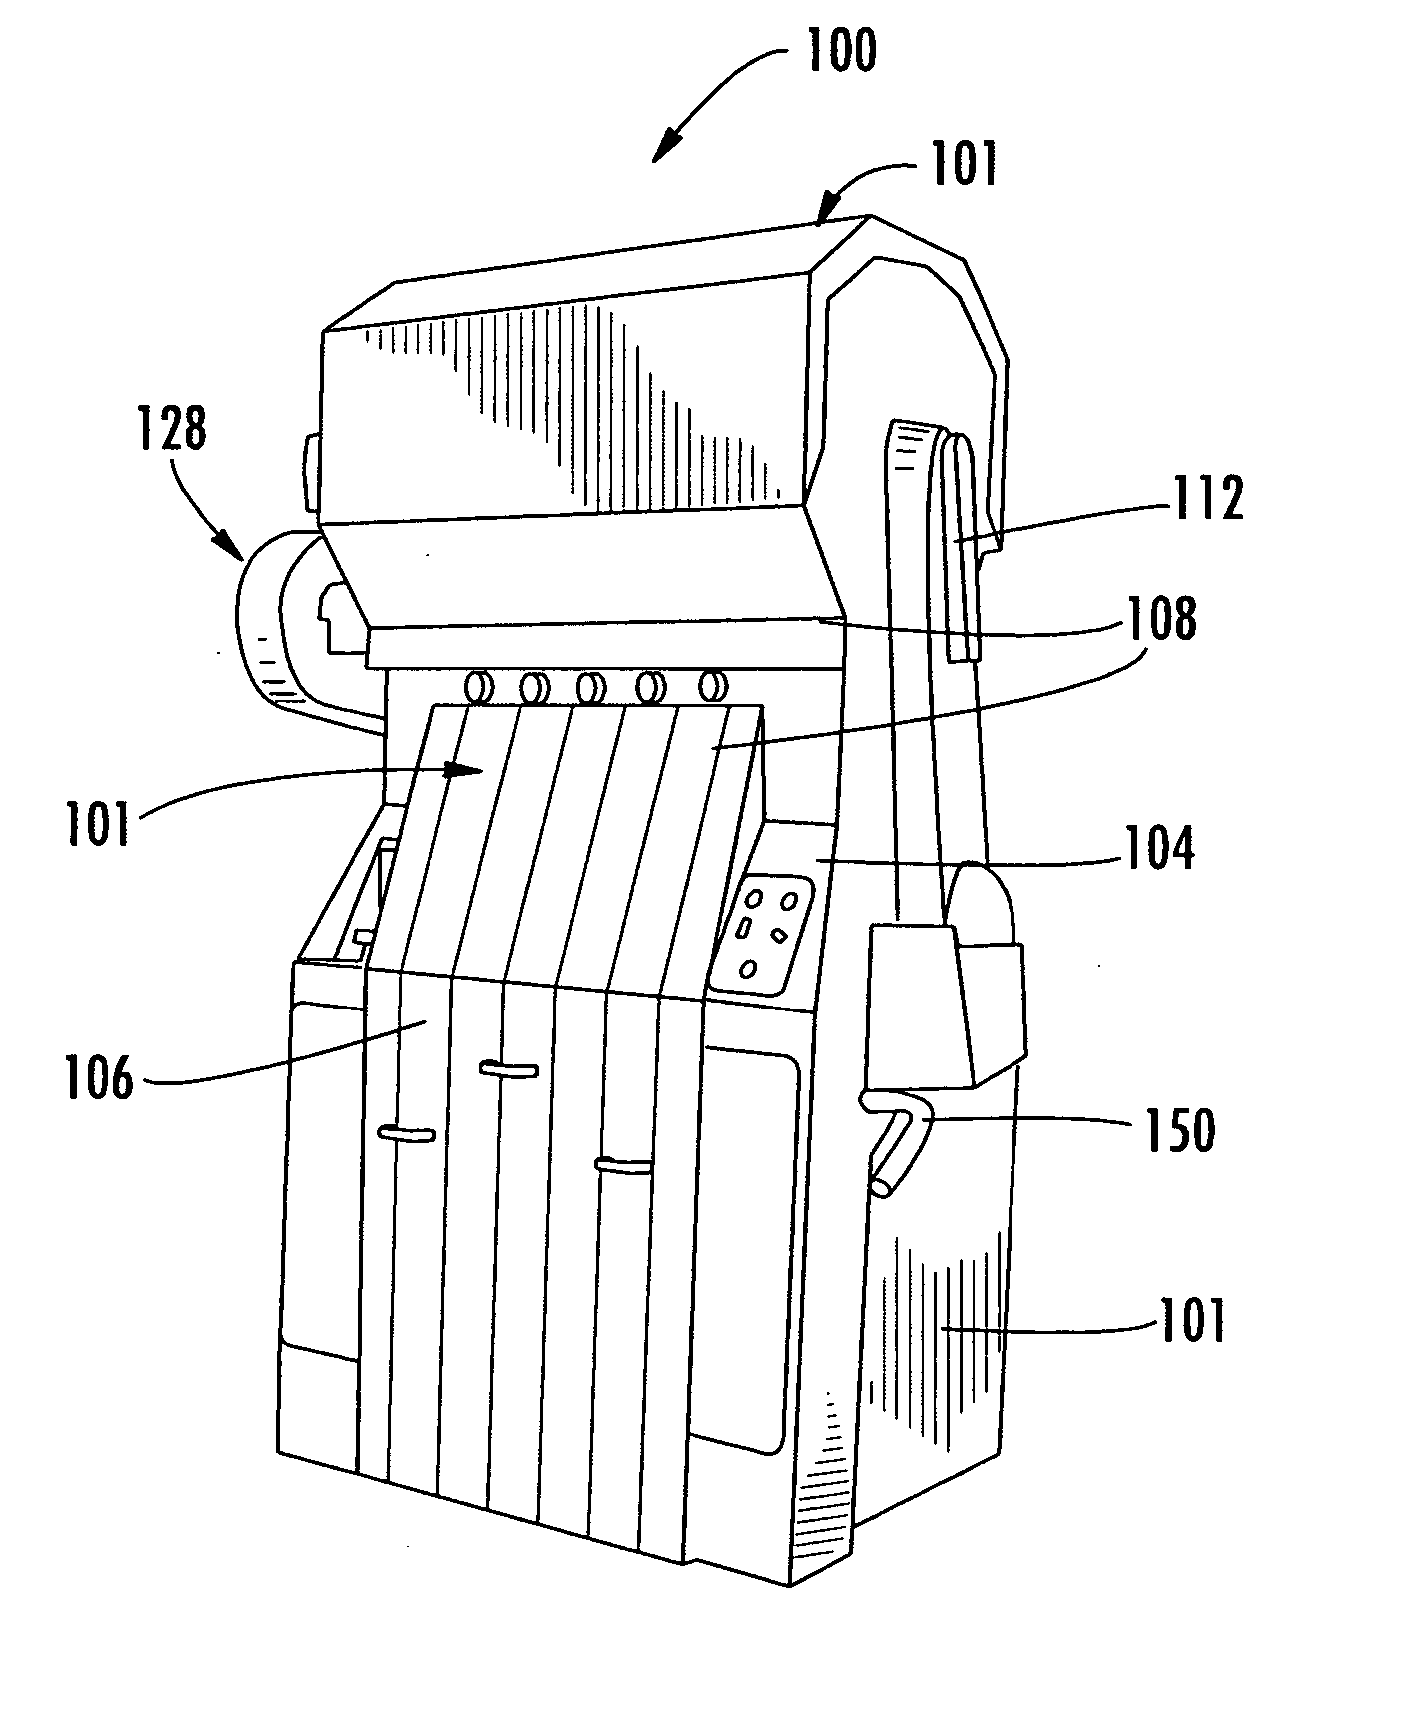 Juice extractor with juice manifold having side outlet for juice